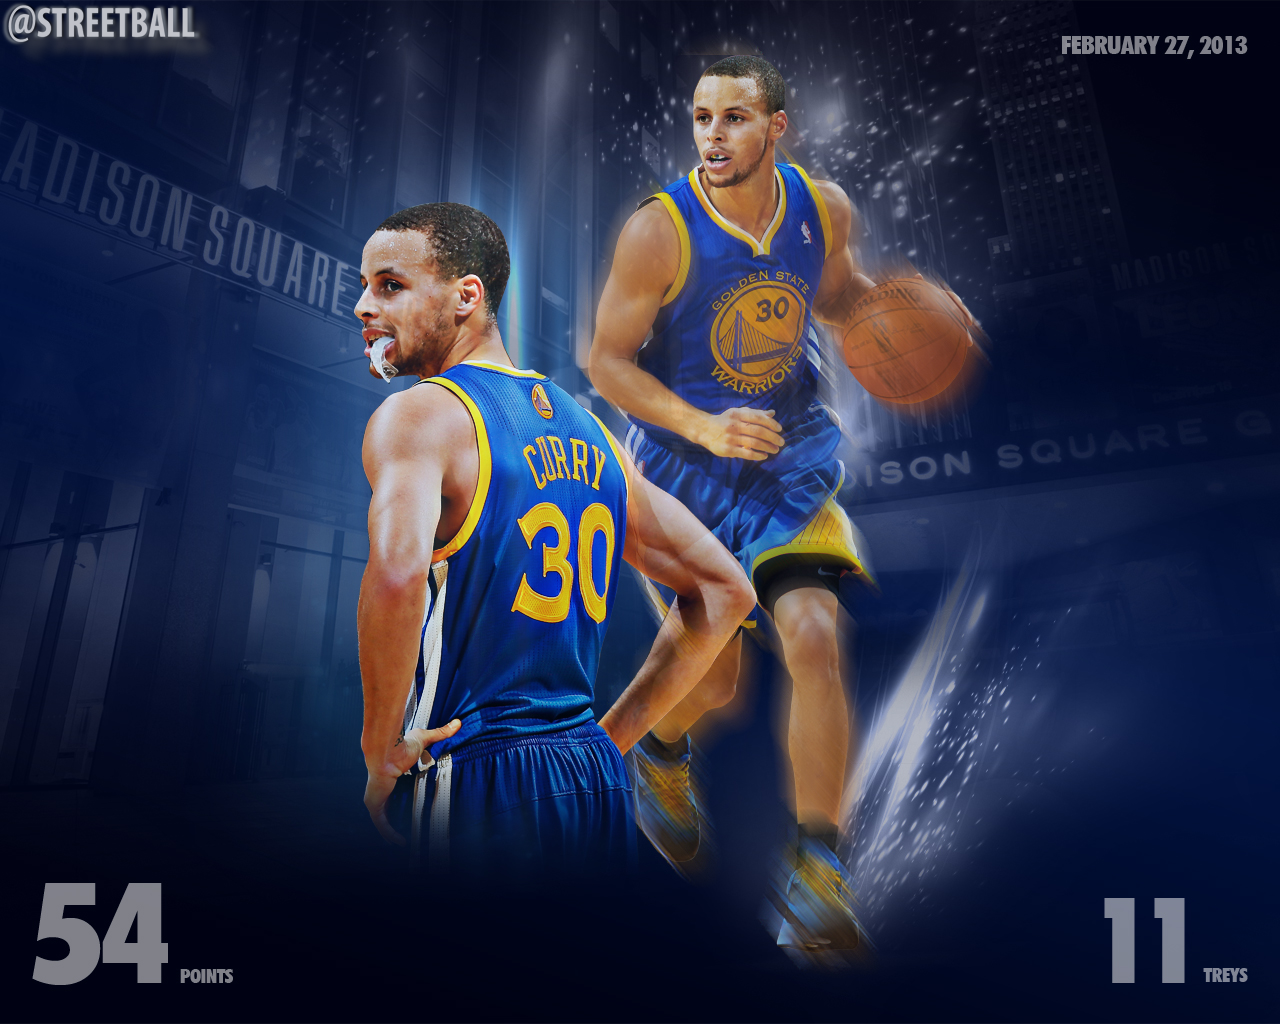 Funmozar Stephen Curry Wallpaper For iPads